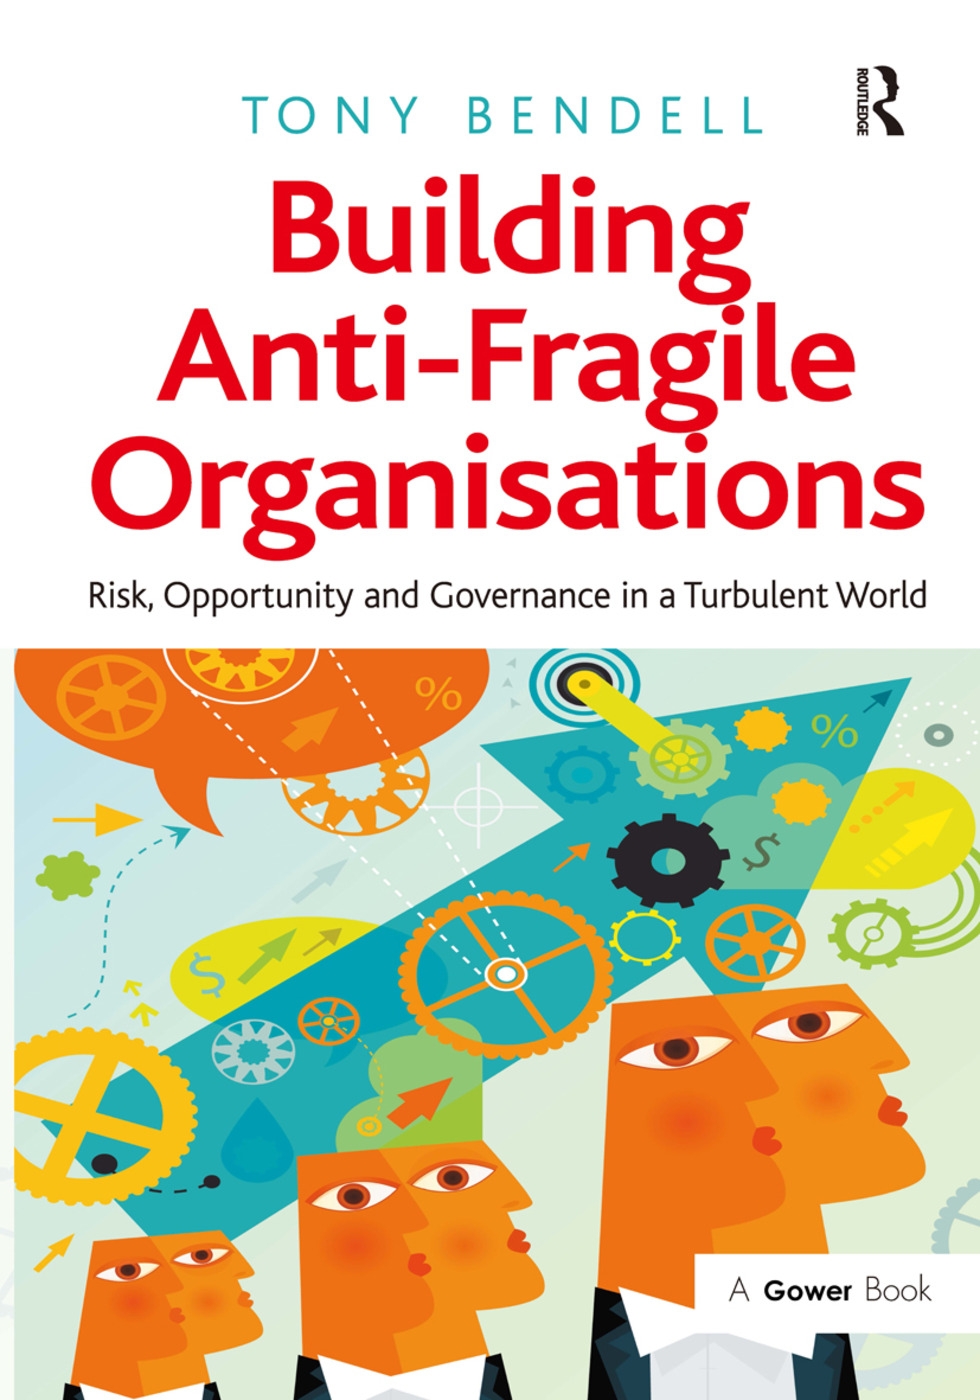 Building Anti-Fragile Organisations: Risk, Opportunity and Governance in a Turbulent World